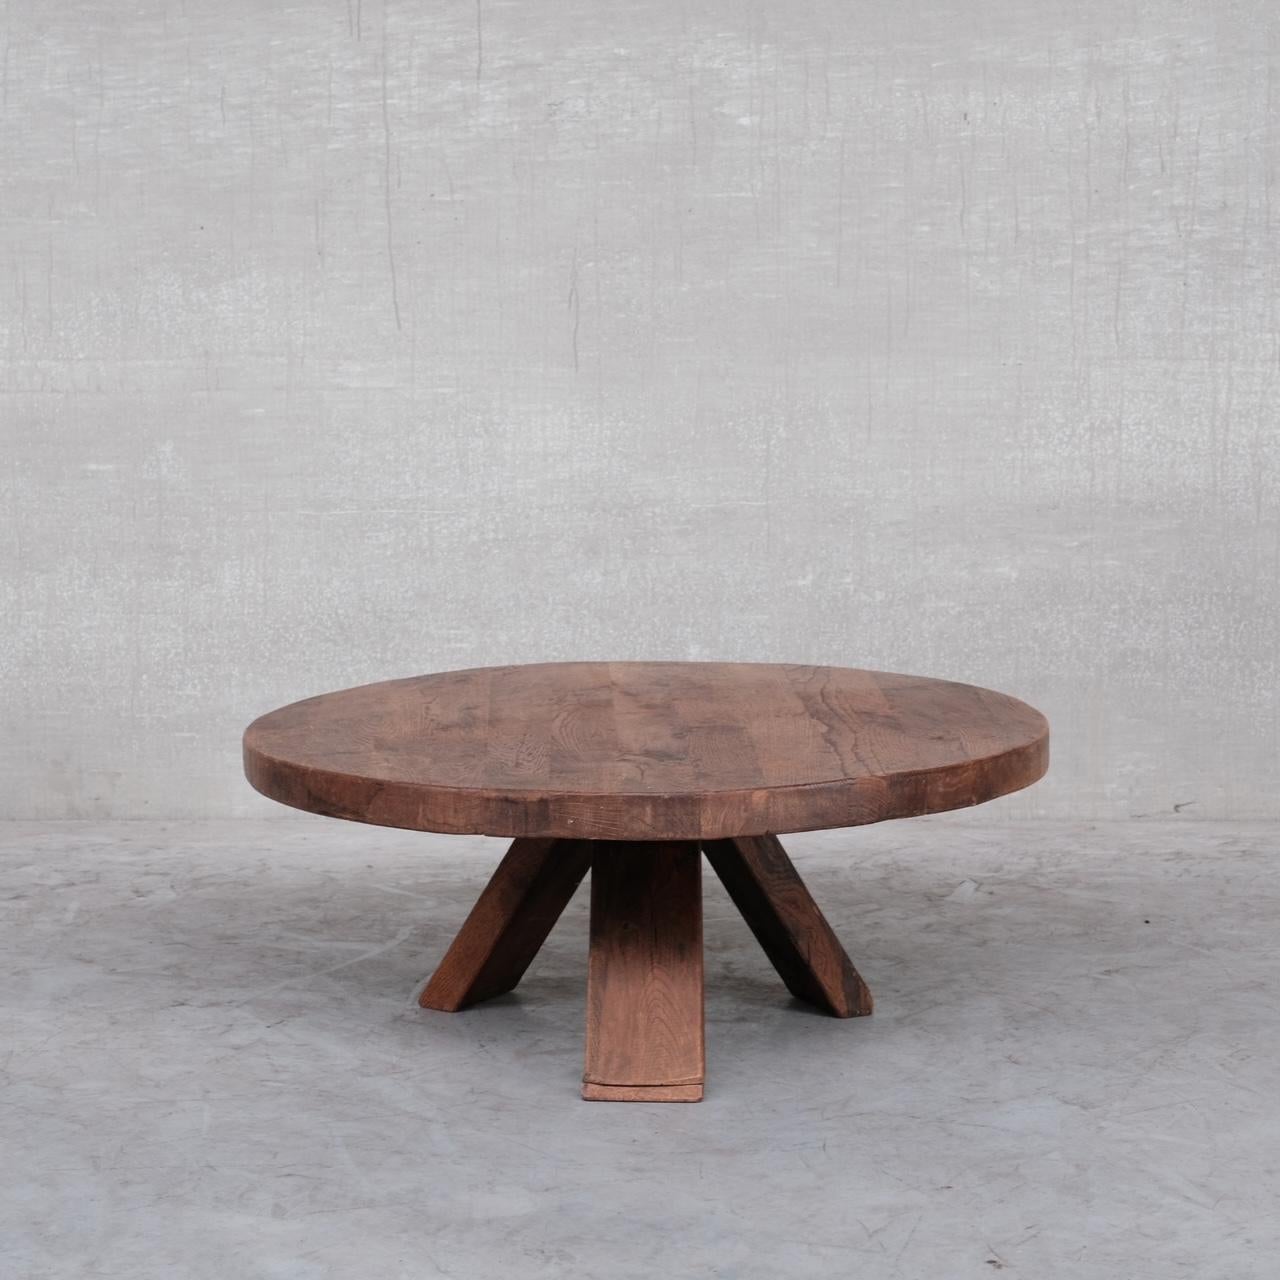 A brutalist oak coffee table. 

Holland, c1970s. 

Solid oak, raised over tripod legs. 

Good condiition generally but some wear to the top commensurate with age. Could be stripped and re-waxed upon request if one prefers a new look.